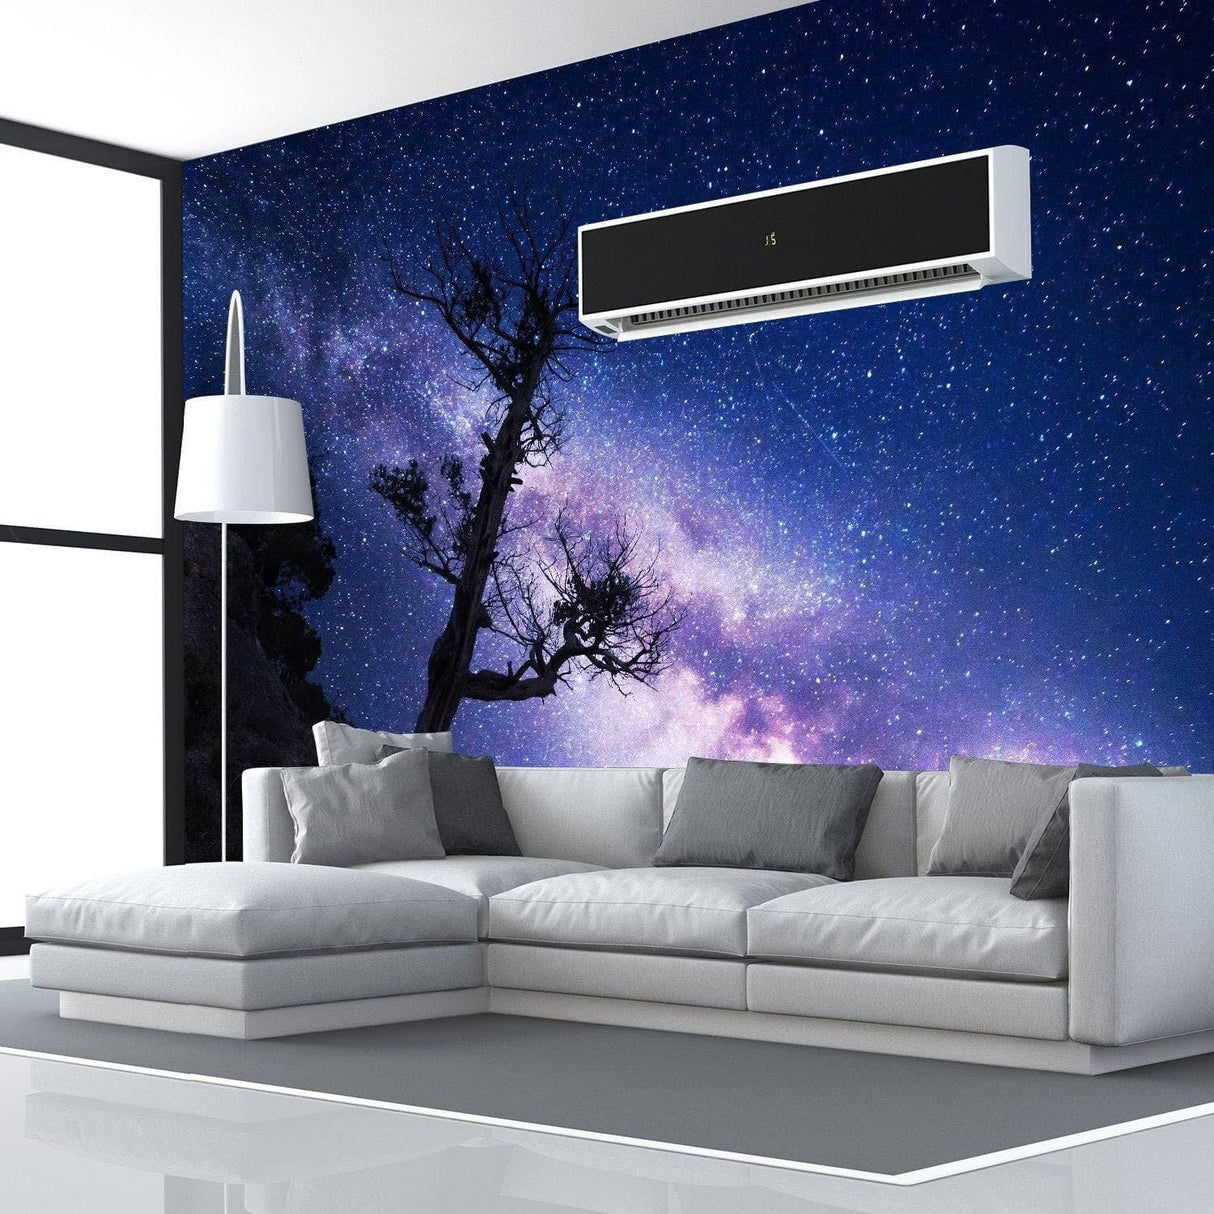 3d Interior mural wallpaper for home wall art deco by